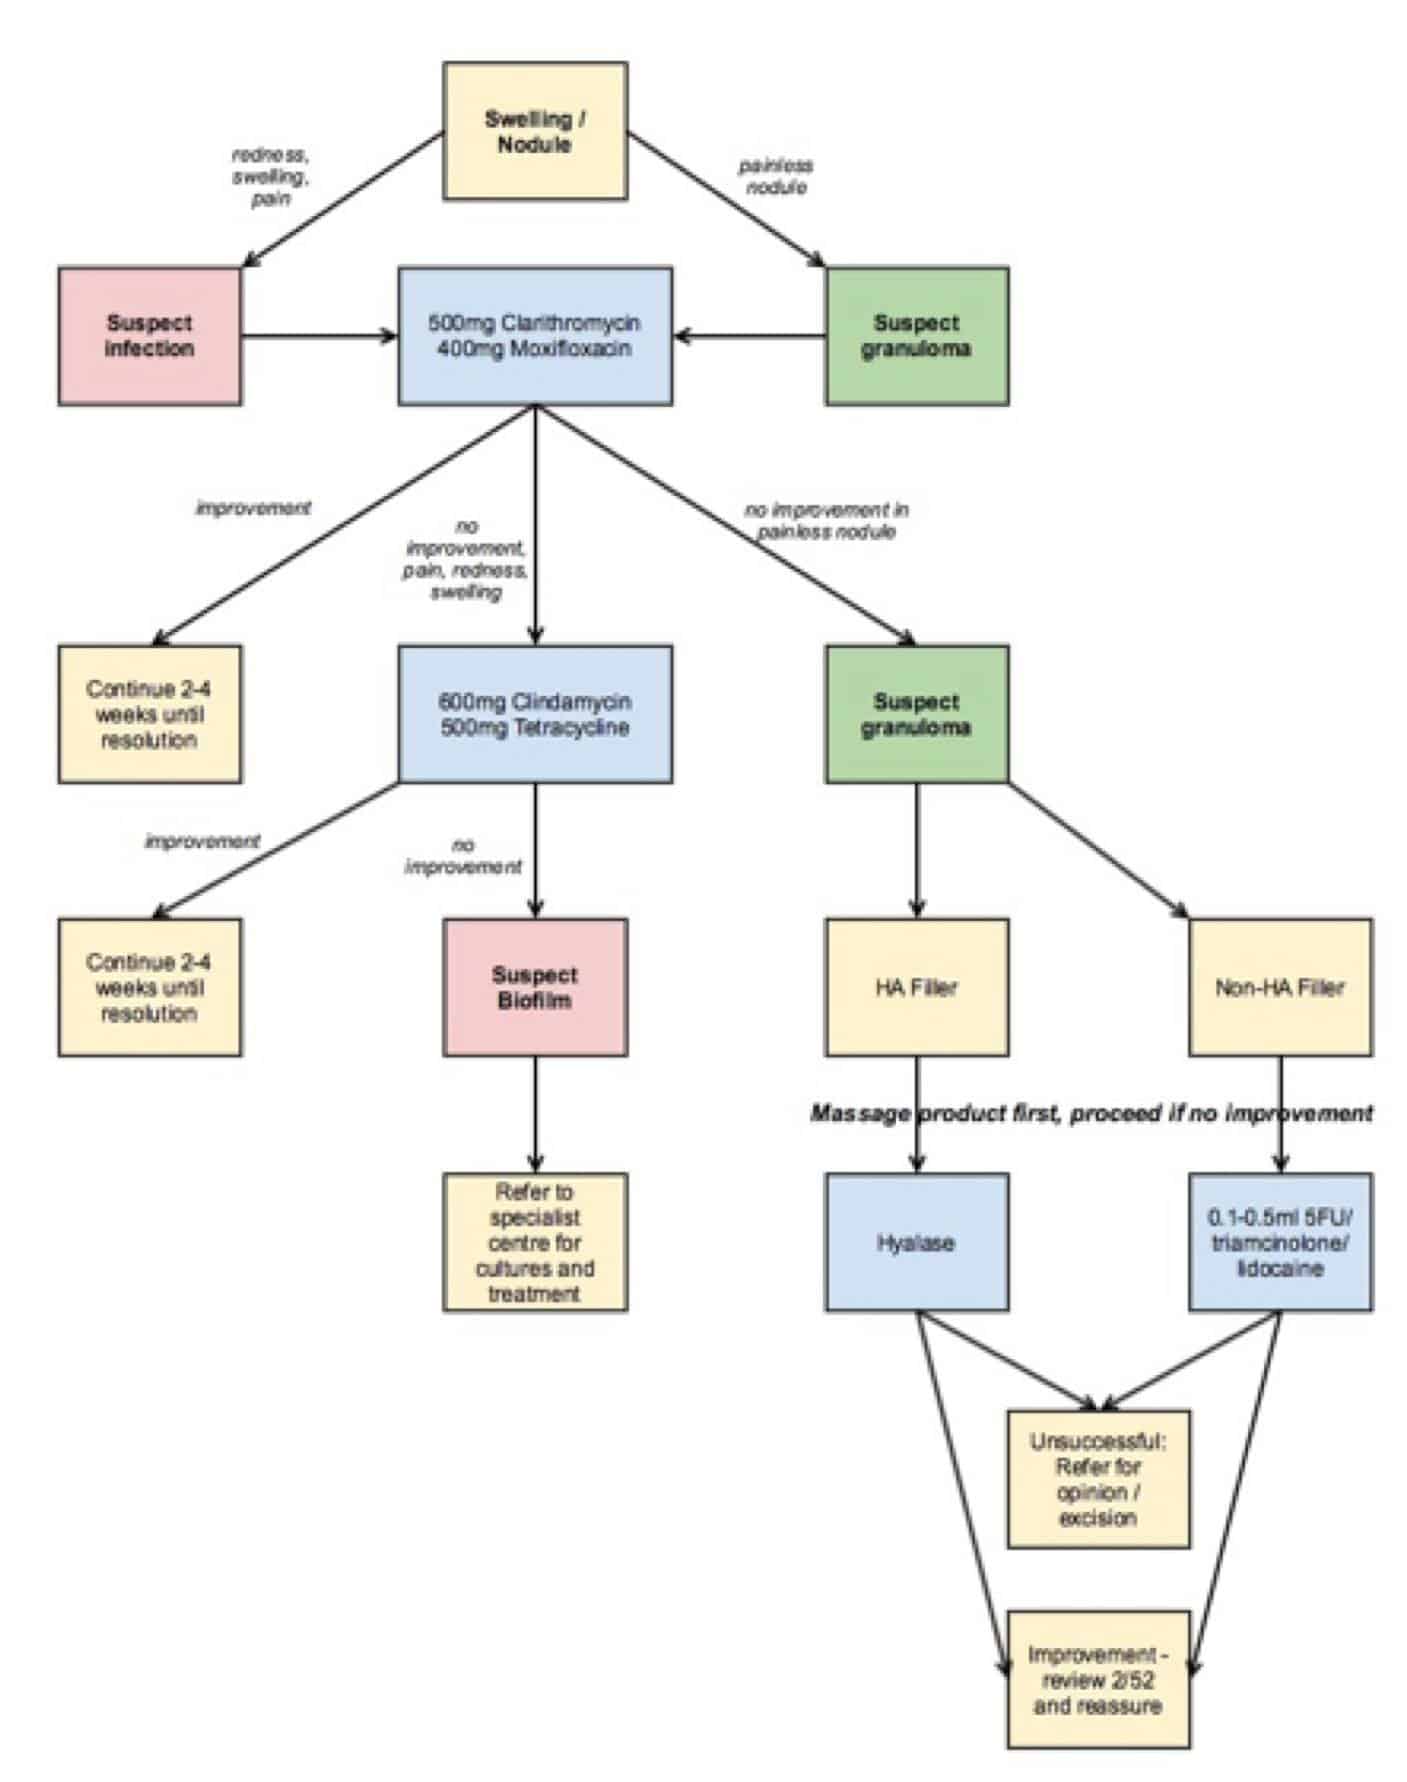 Figure 2- Treatment algorithm for infections and biofilms